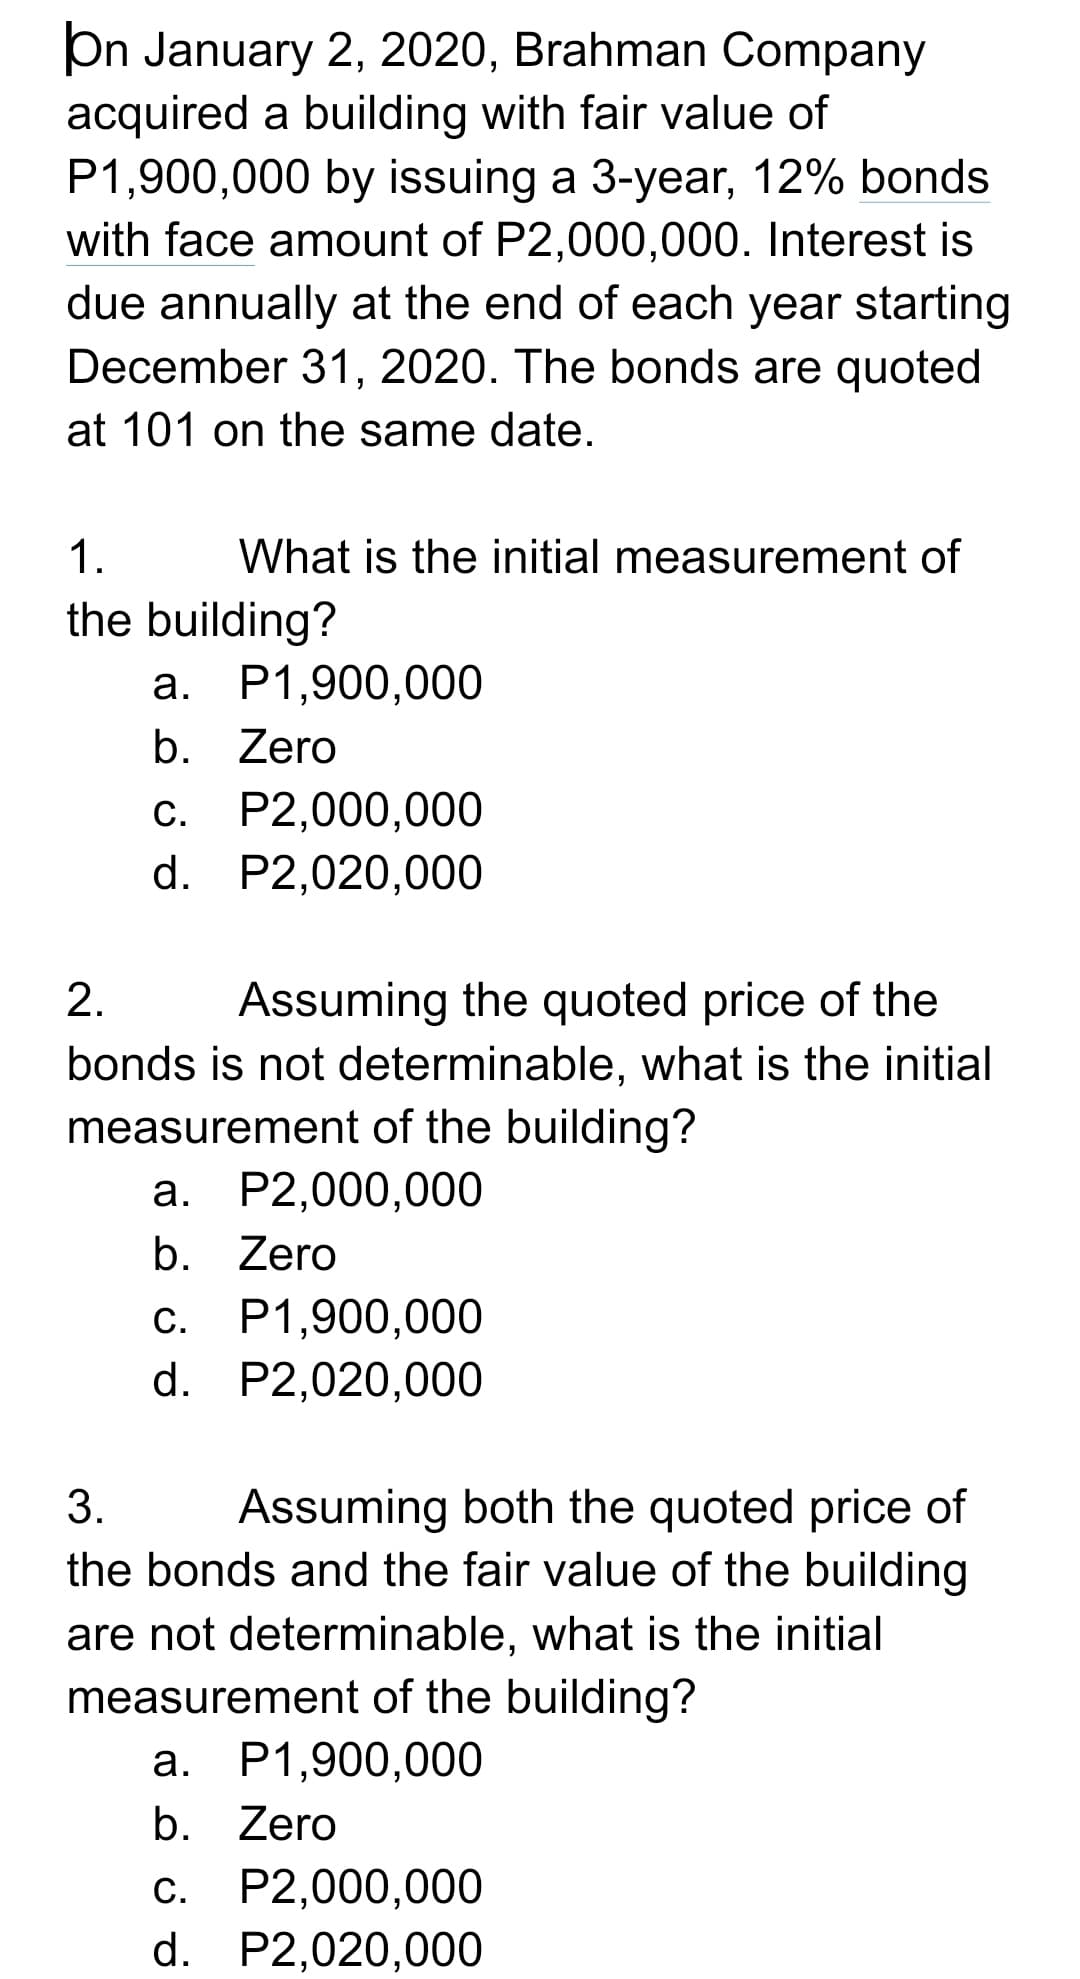 On January 2, 2020, Brahman Company
acquired a building with fair value of
P1,900,000 by issuing a 3-year, 12% bonds
with face amount of P2,000,000. Interest is
due annually at the end of each year starting
December 31, 2020. The bonds are quoted
at 101 on the same date.
1.
What is the initial measurement of
the building?
2.
Assuming the quoted price of the
bonds is not determinable, what is the initial
measurement of the building?
a. P2,000,000
b. Zero
c. P1,900,000
d. P2,020,000
3.
Assuming both the quoted price of
the bonds and the fair value of the building
are not determinable, what is the initial
measurement of the building?
a. P1,900,000
b. Zero
c. P2,000,000
d. P2,020,000
a. P1,900,000
b. Zero
C.
P2,000,000
d. P2,020,000